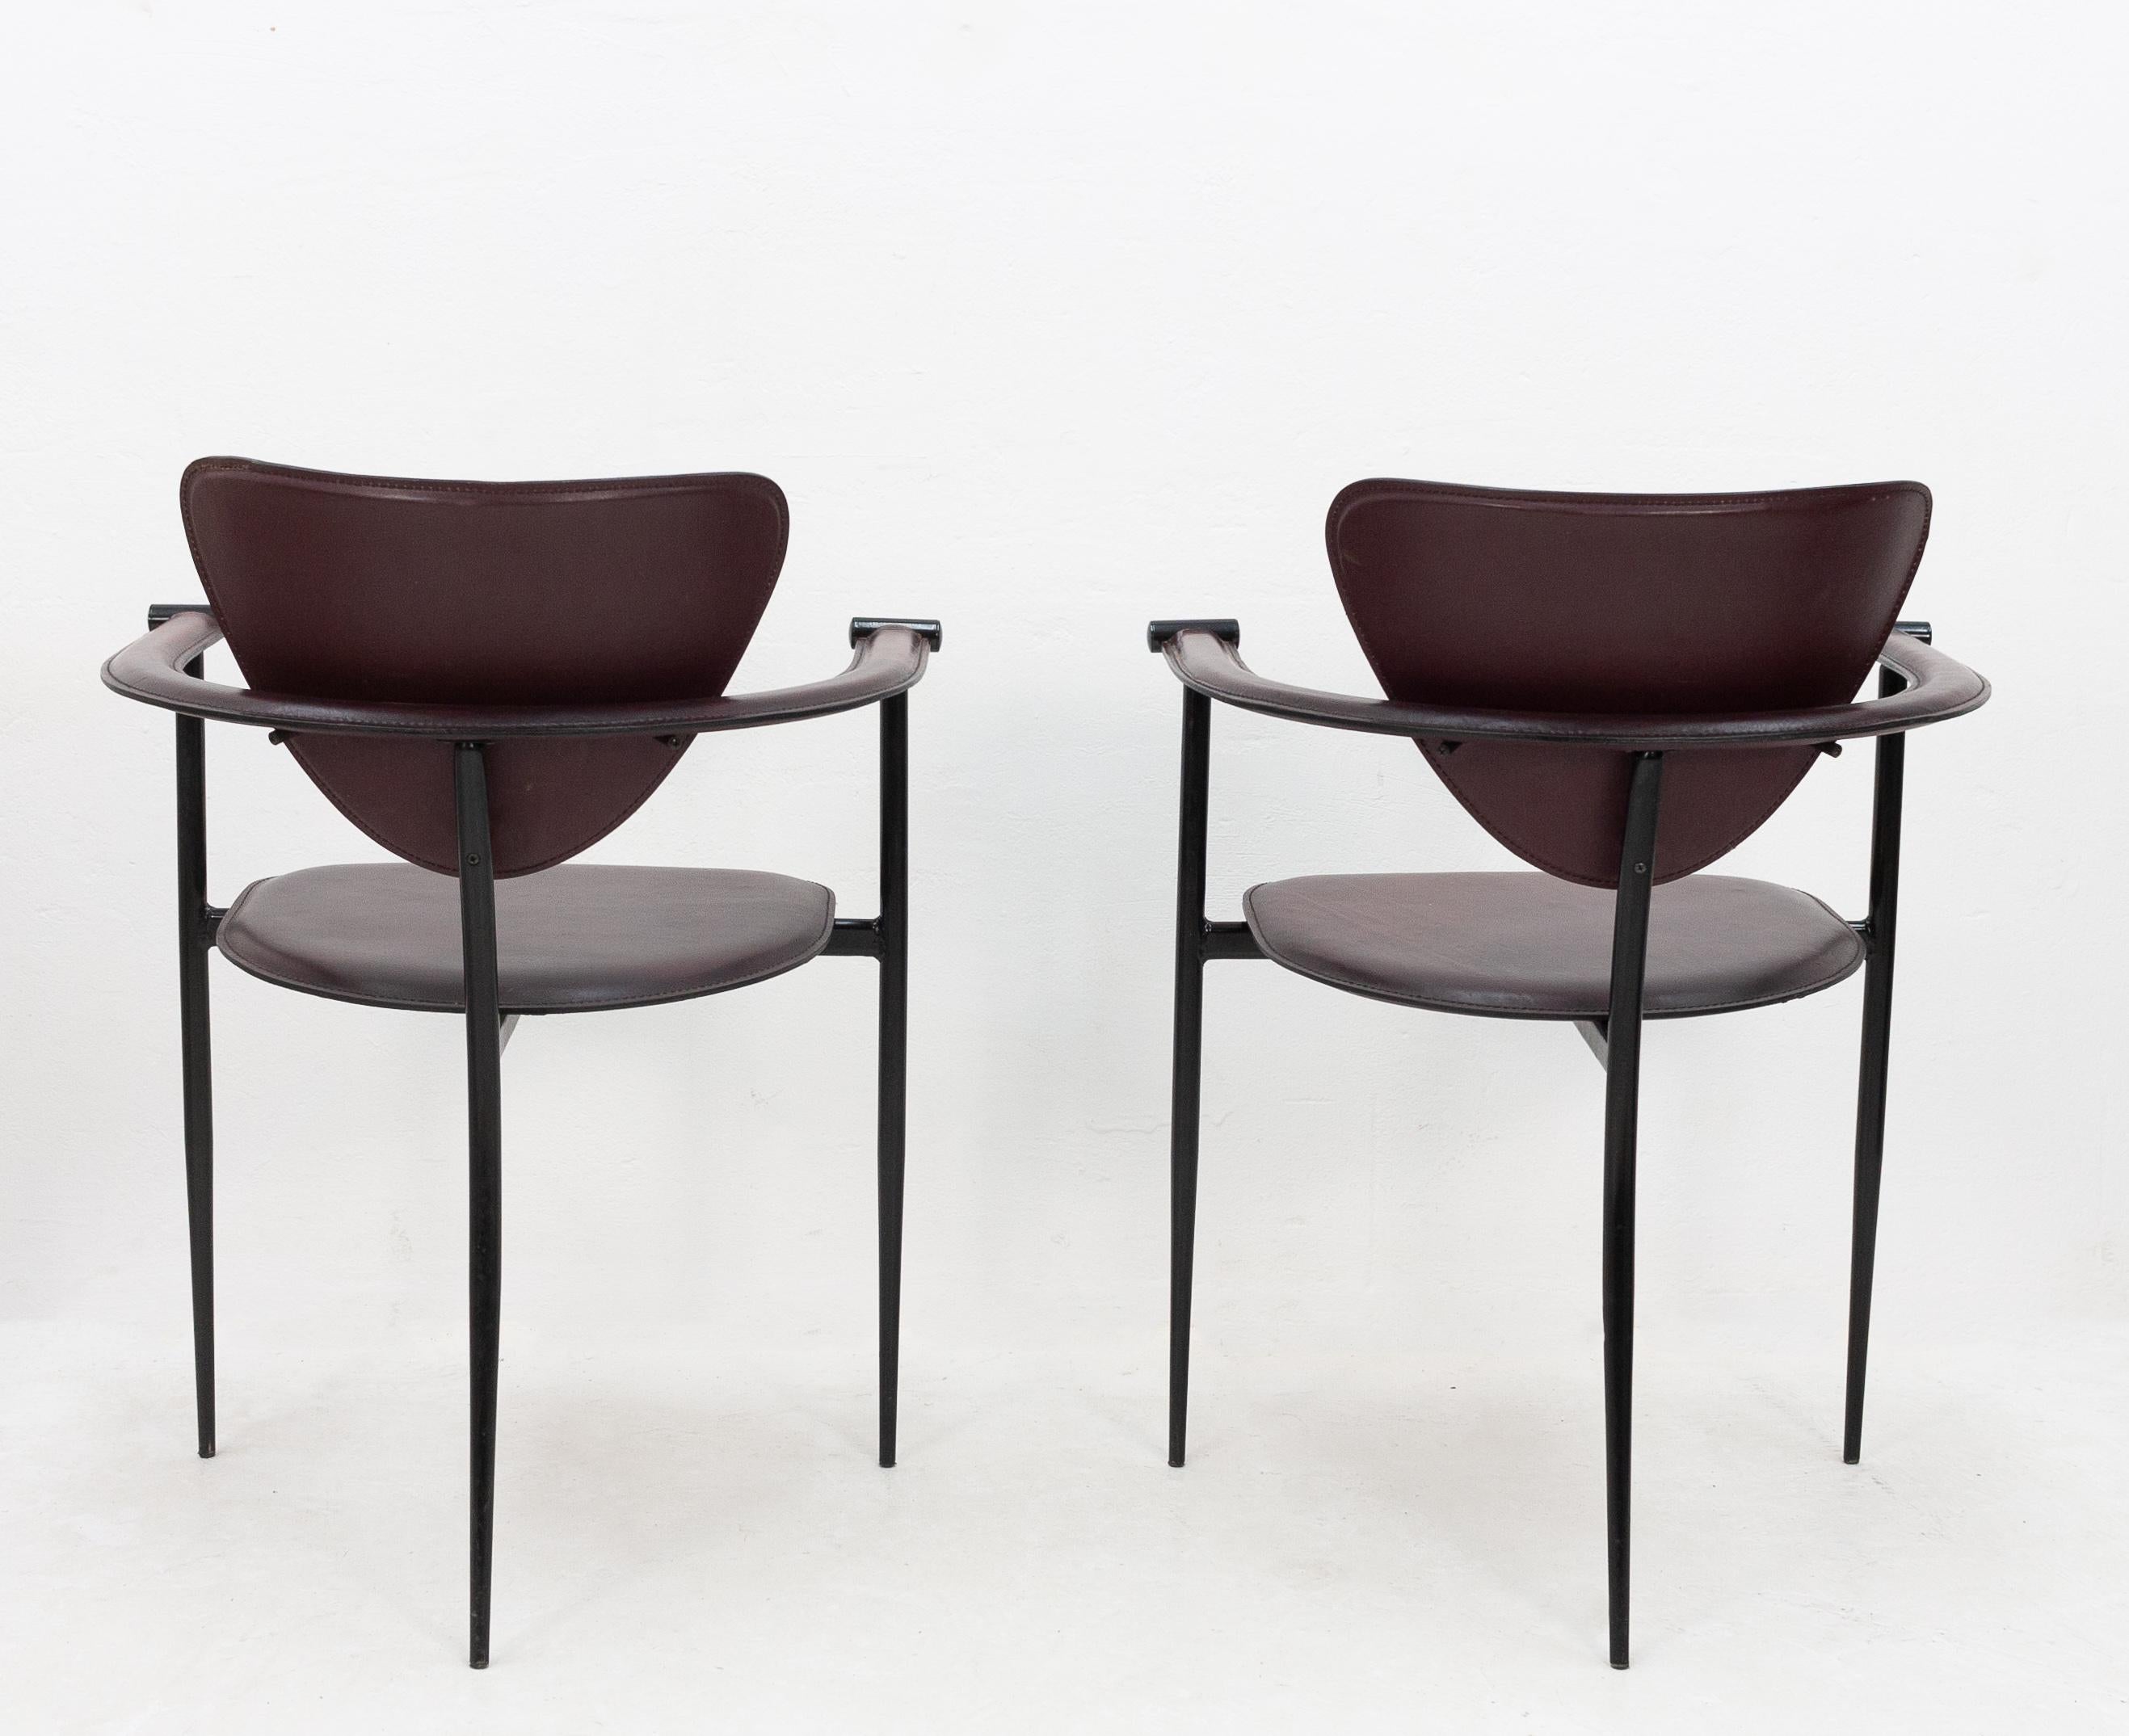 Two Arrben stiletto armchairs upholstered in black cherry leather on a black chrome frame. Italy 1970s. The bottoms of the seats have had some repair work done where the leather had split apart, see photos.